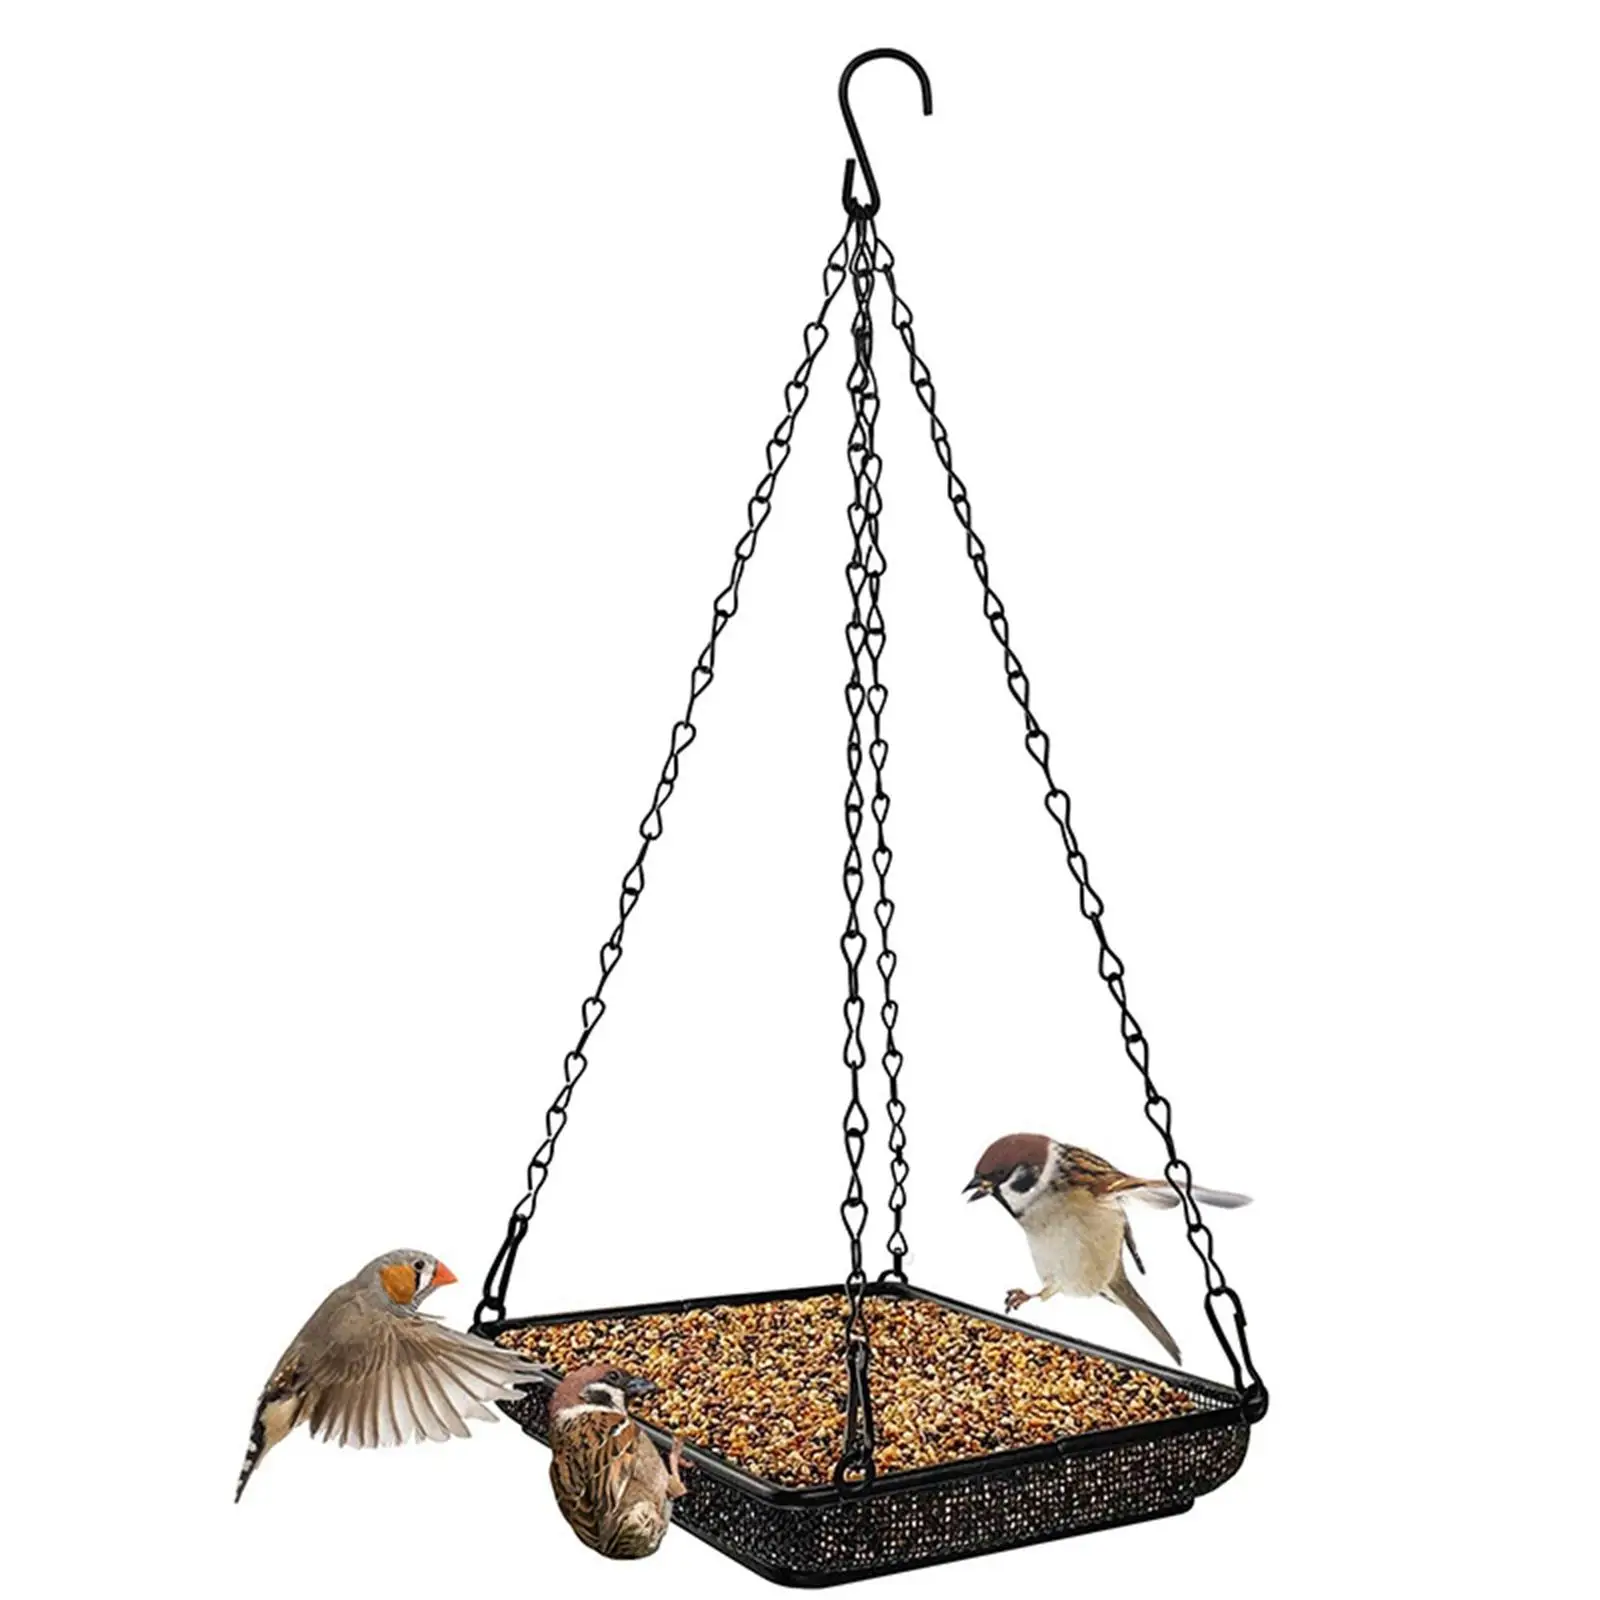 Iron Hanging Bird Feeder Tray Strong Chains Metal Mesh Platform Seed Tray for Outdoors Backyard Patio.jpg